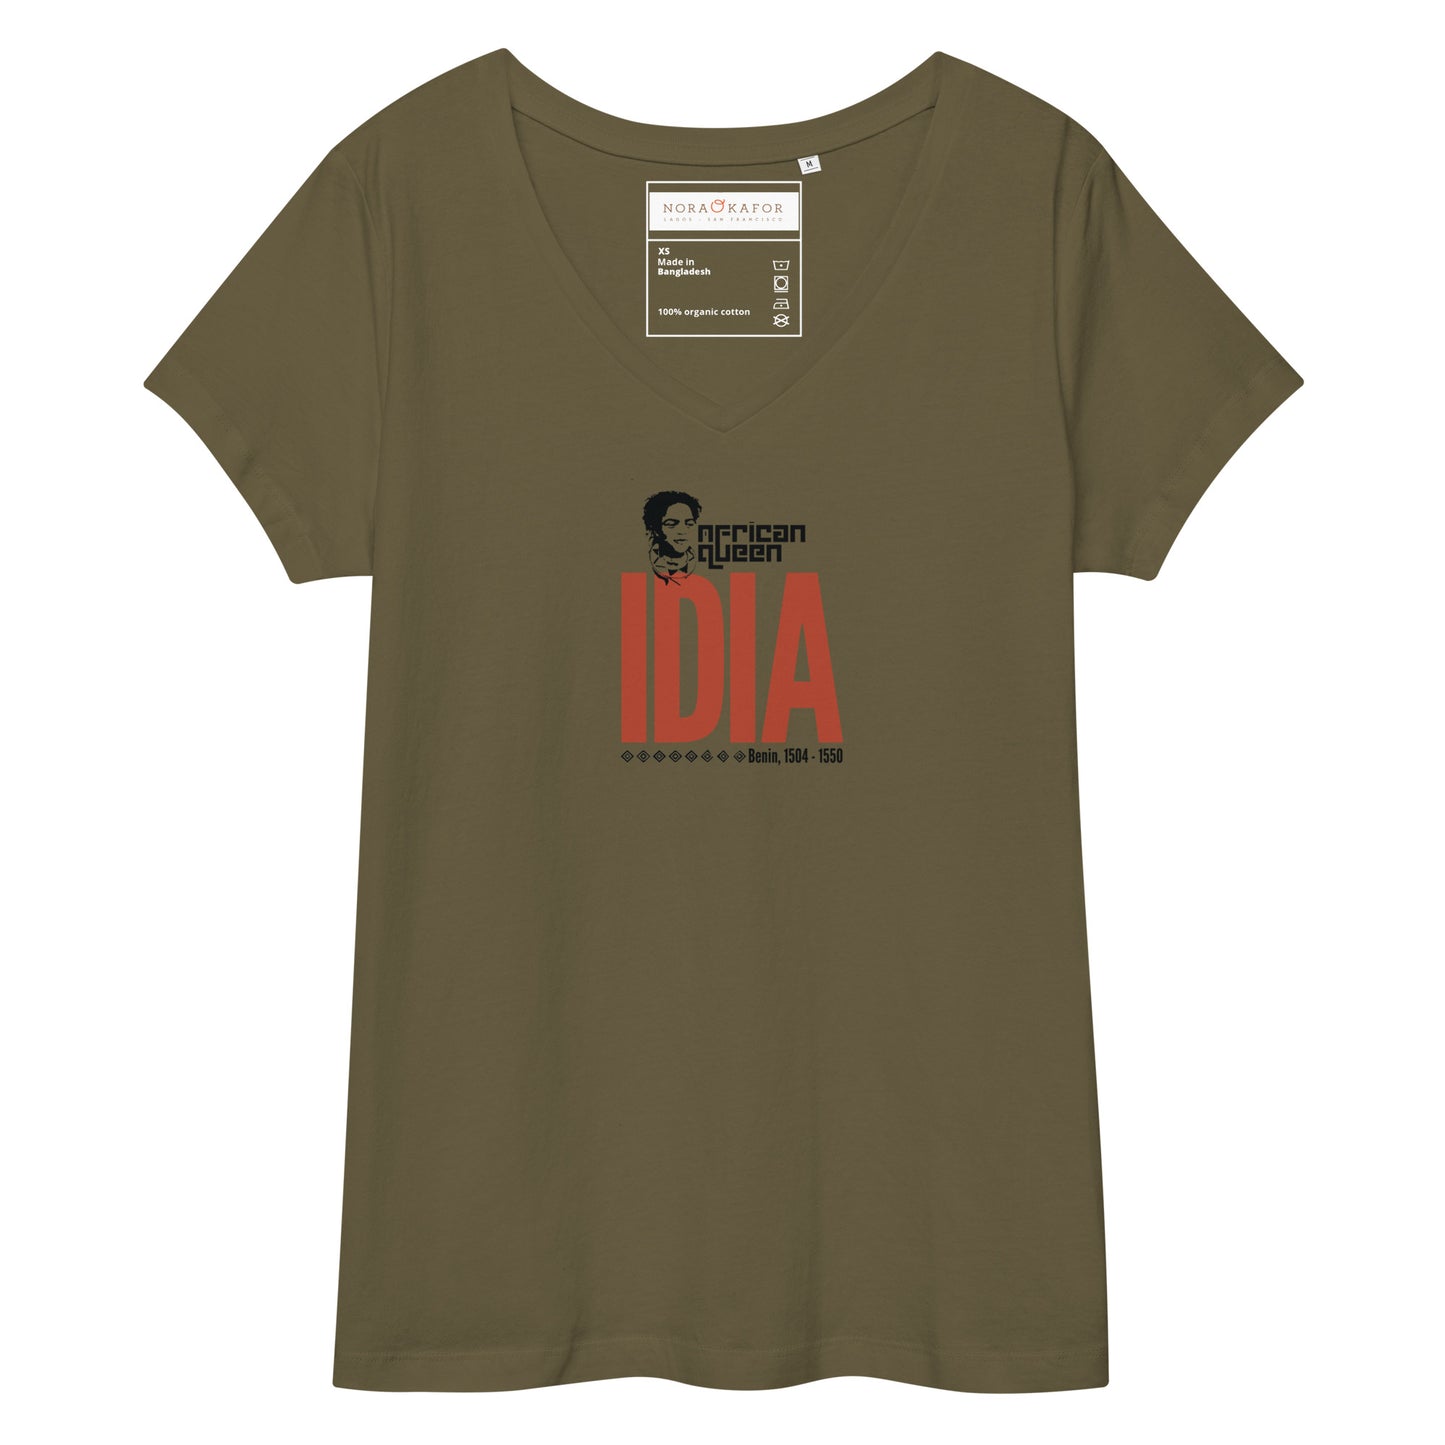 Queen Idia Women’s fitted v-neck t-shirt